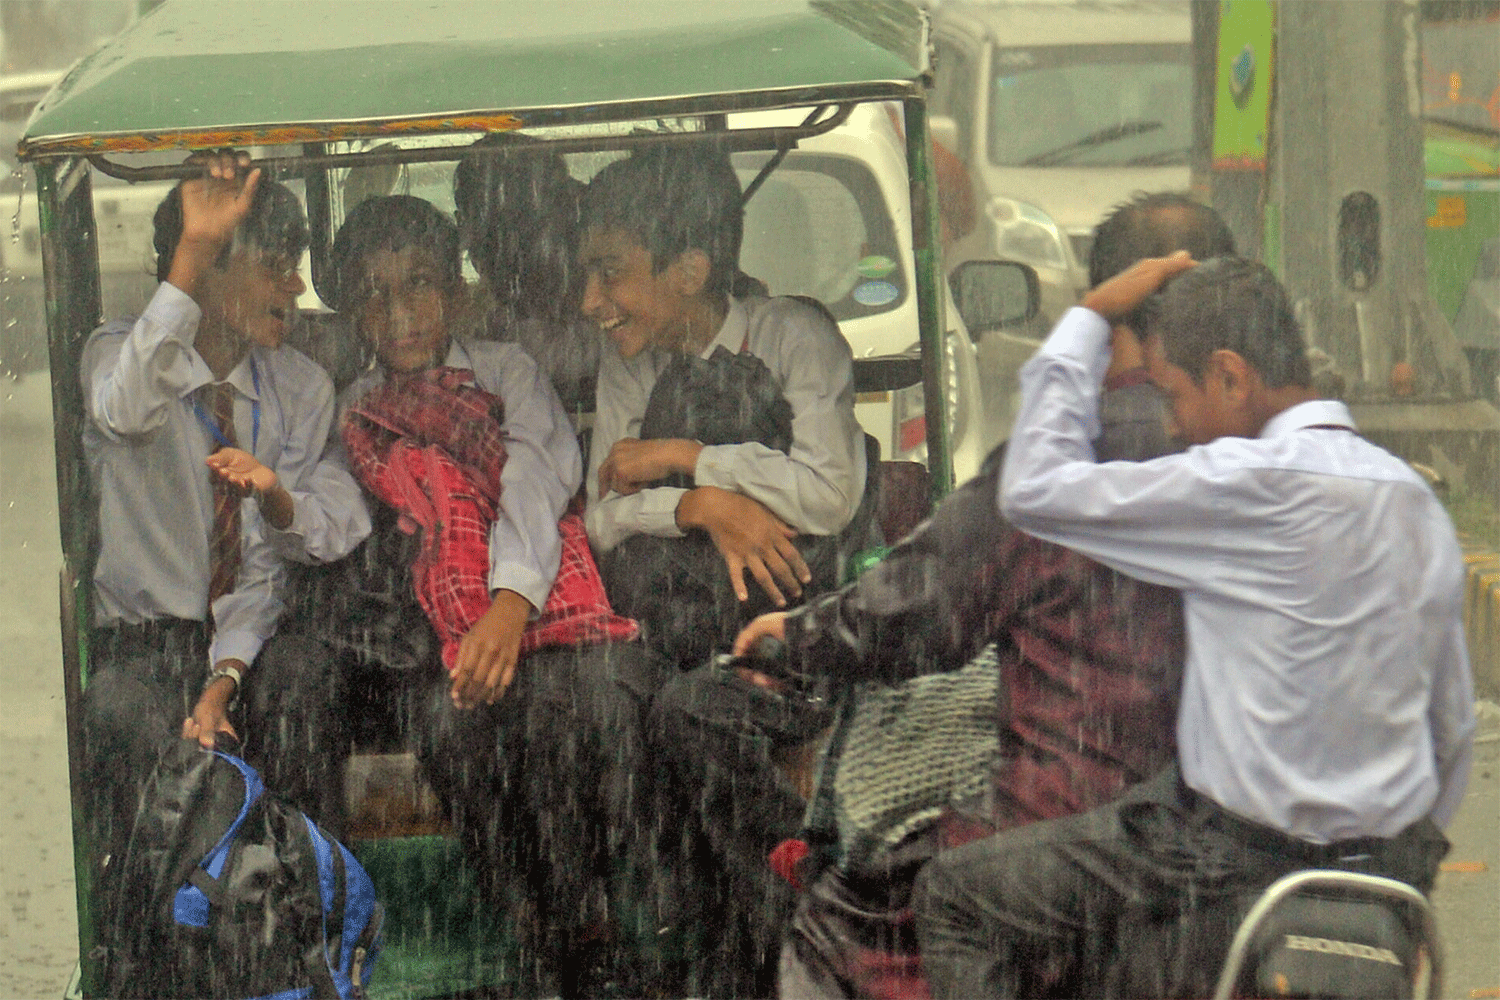 More rain is expected in several parts of the country during the next 12 hours